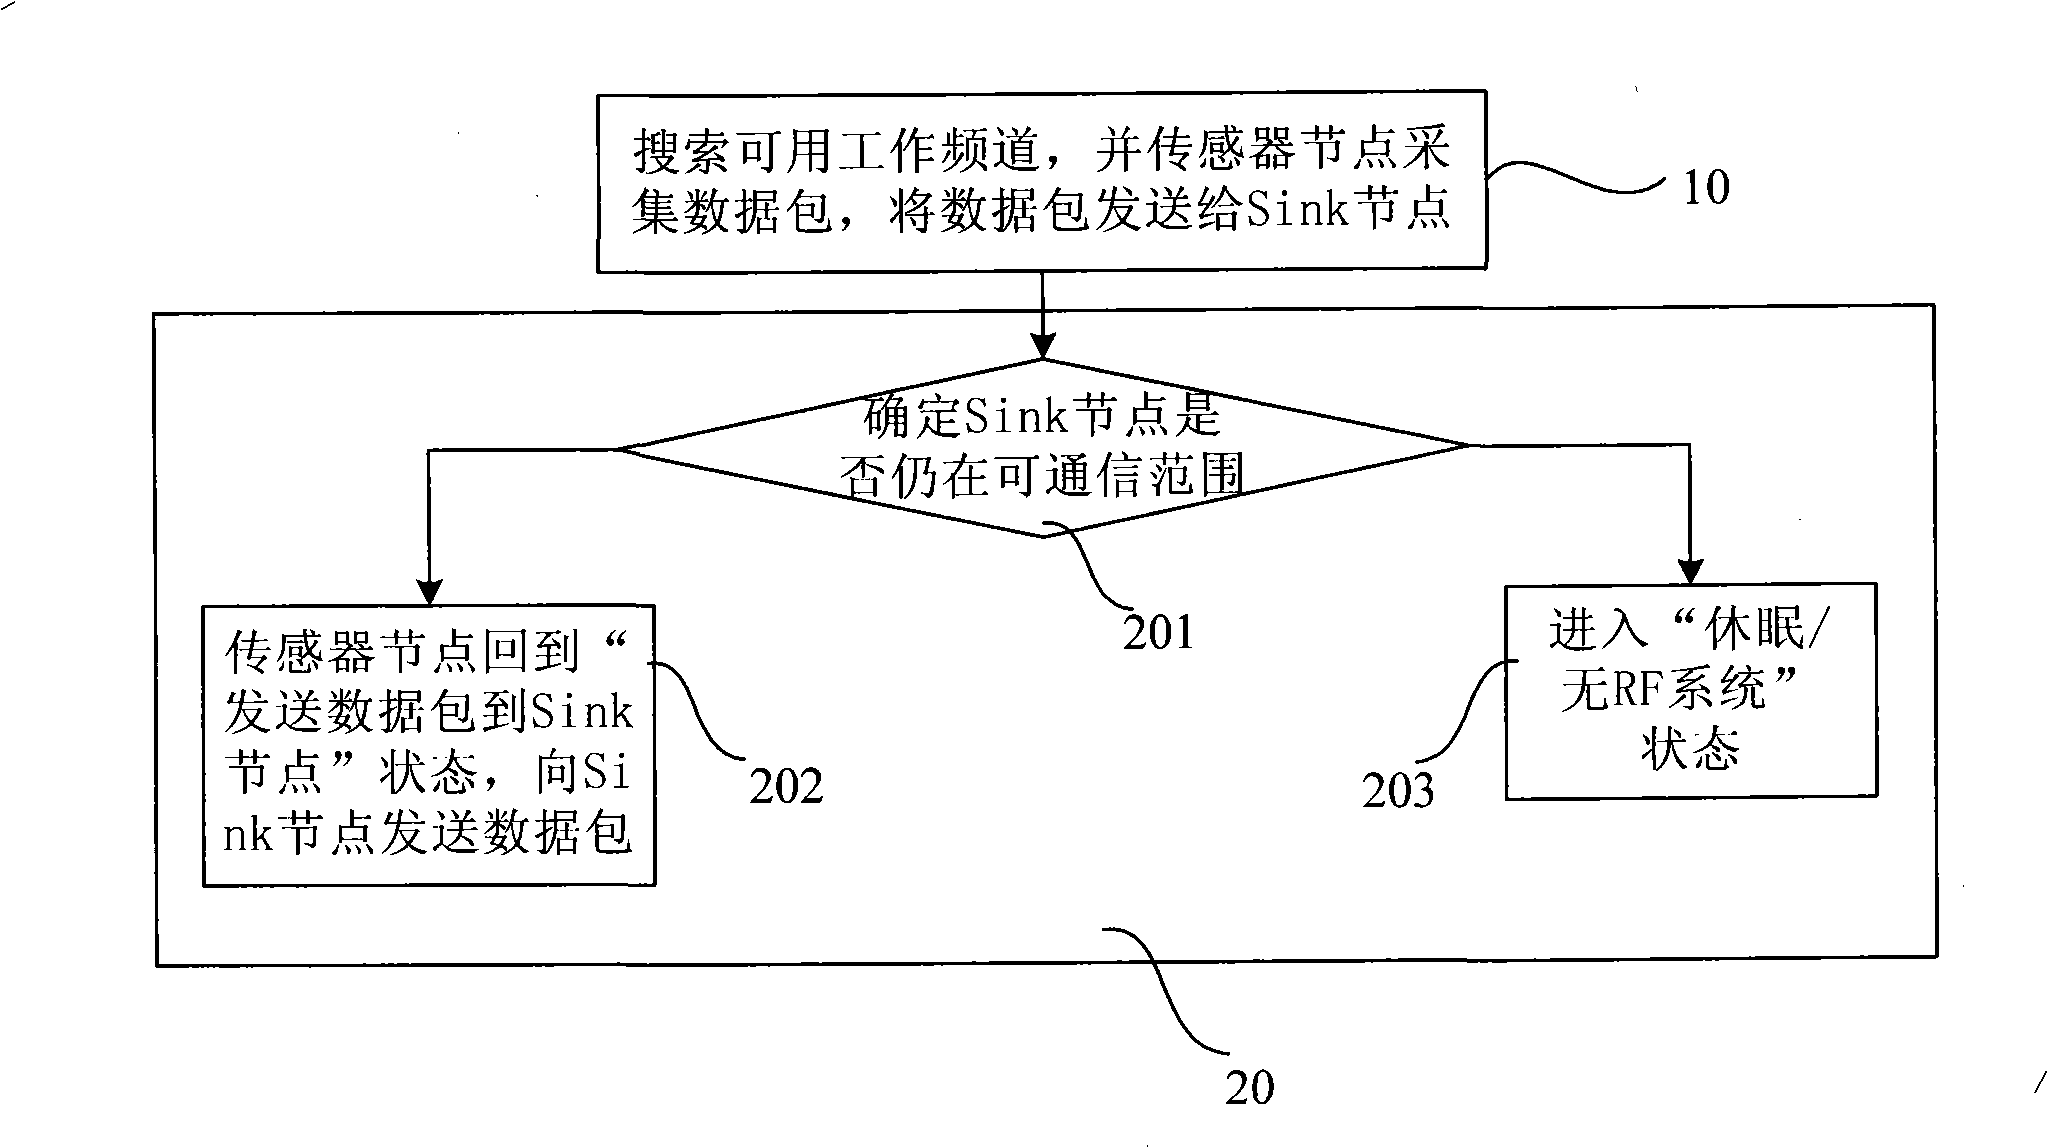 Industrial wireless sensing network and communication method based on distributed coordinated frequency